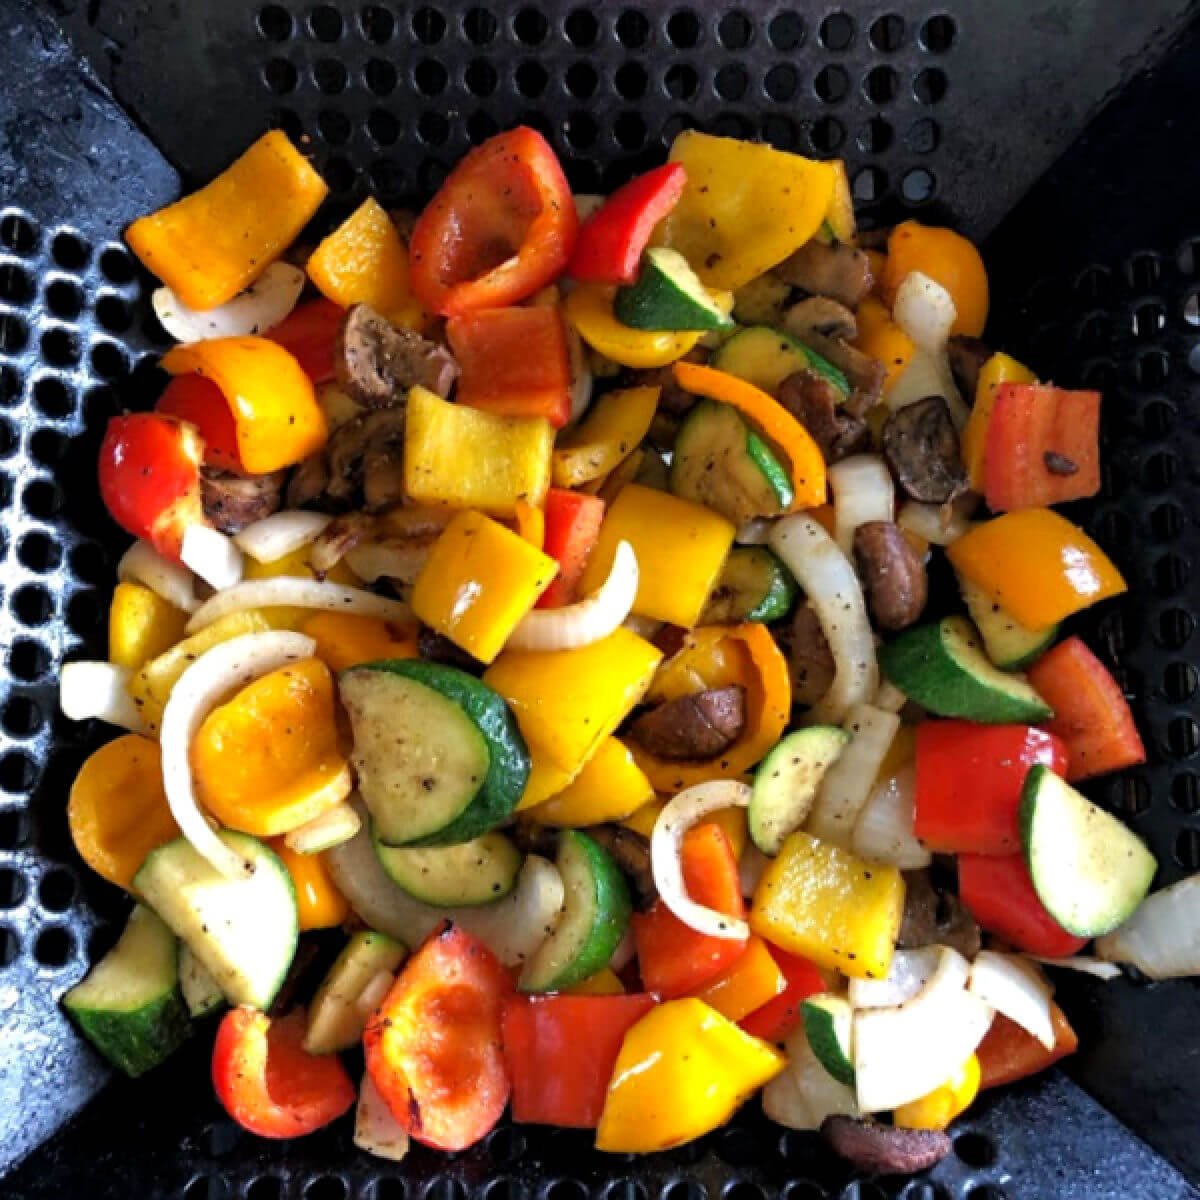 Grilled peppers, mushrooms and onions in a grill wok.